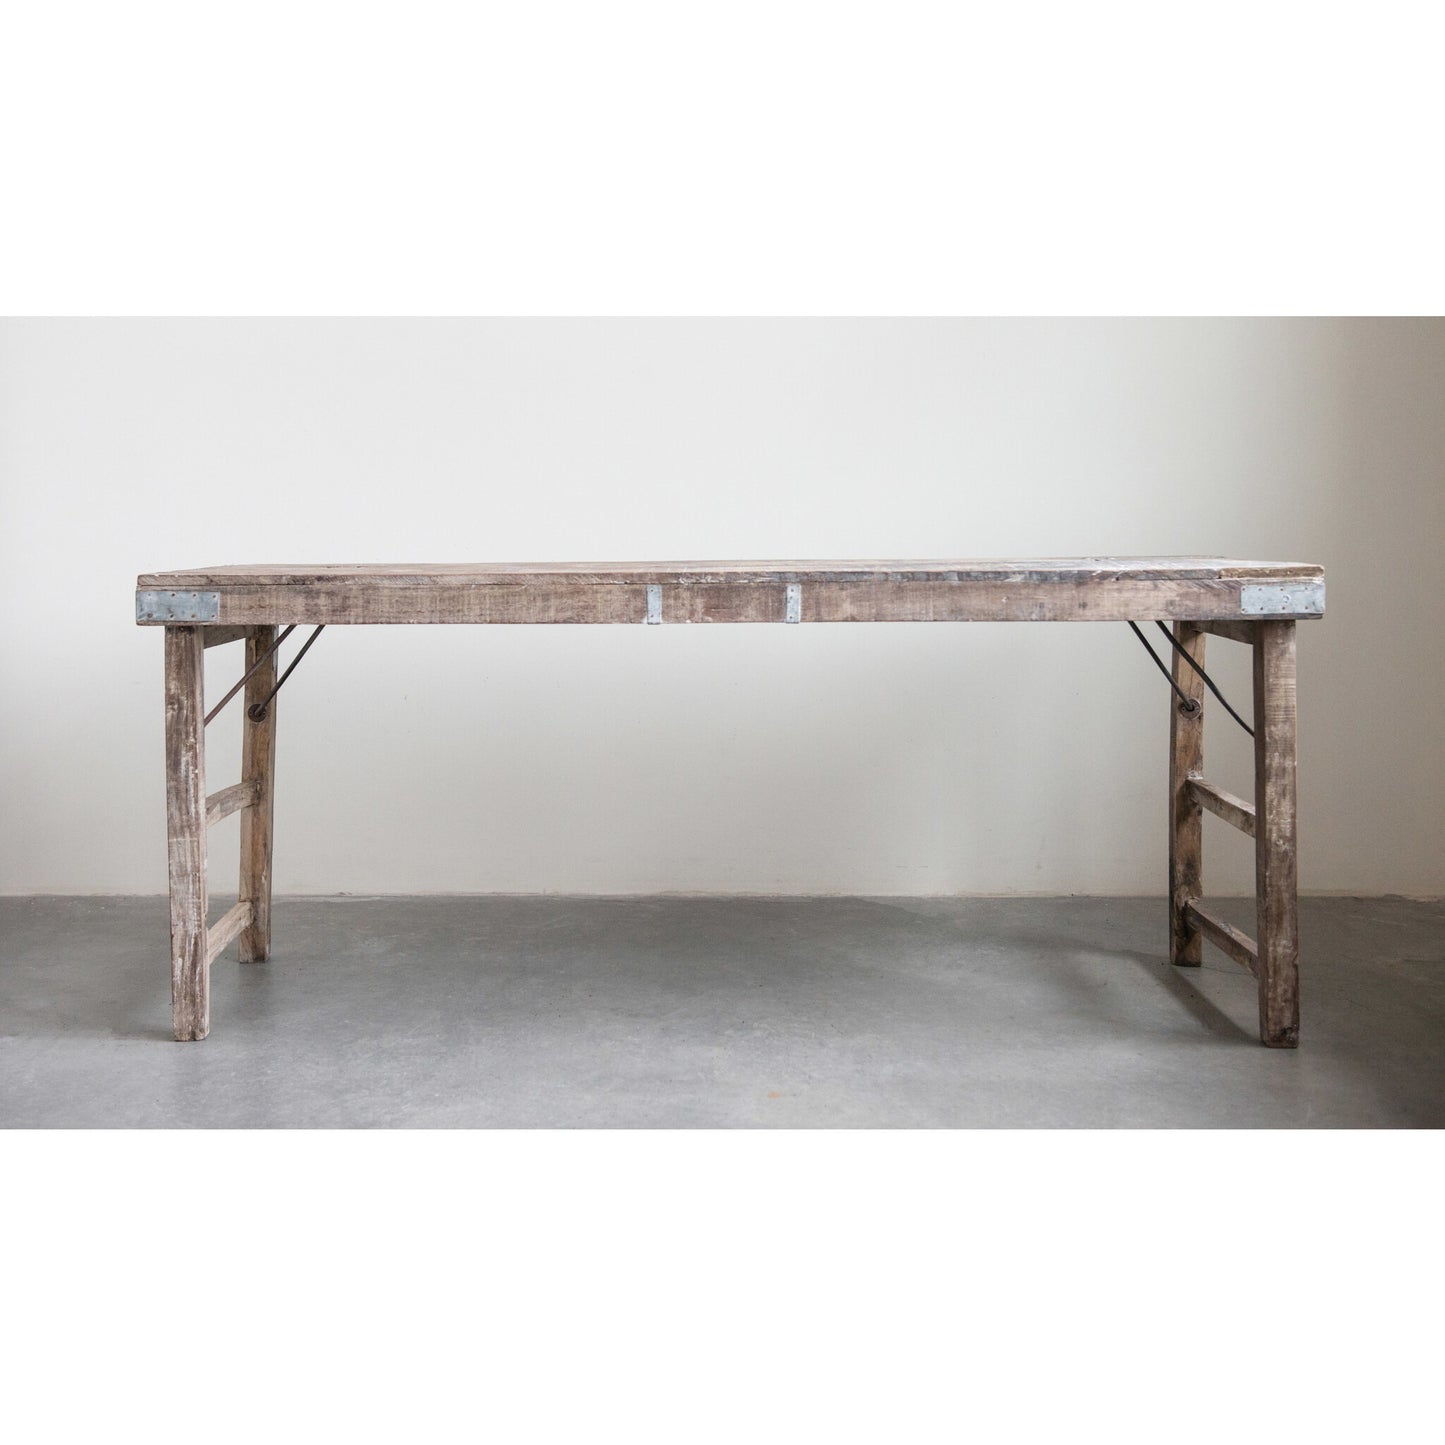 Reclaimed Wood Folding Table w/ Tin Patches-Display 22x69 | Dining | Sunday Night Dinner